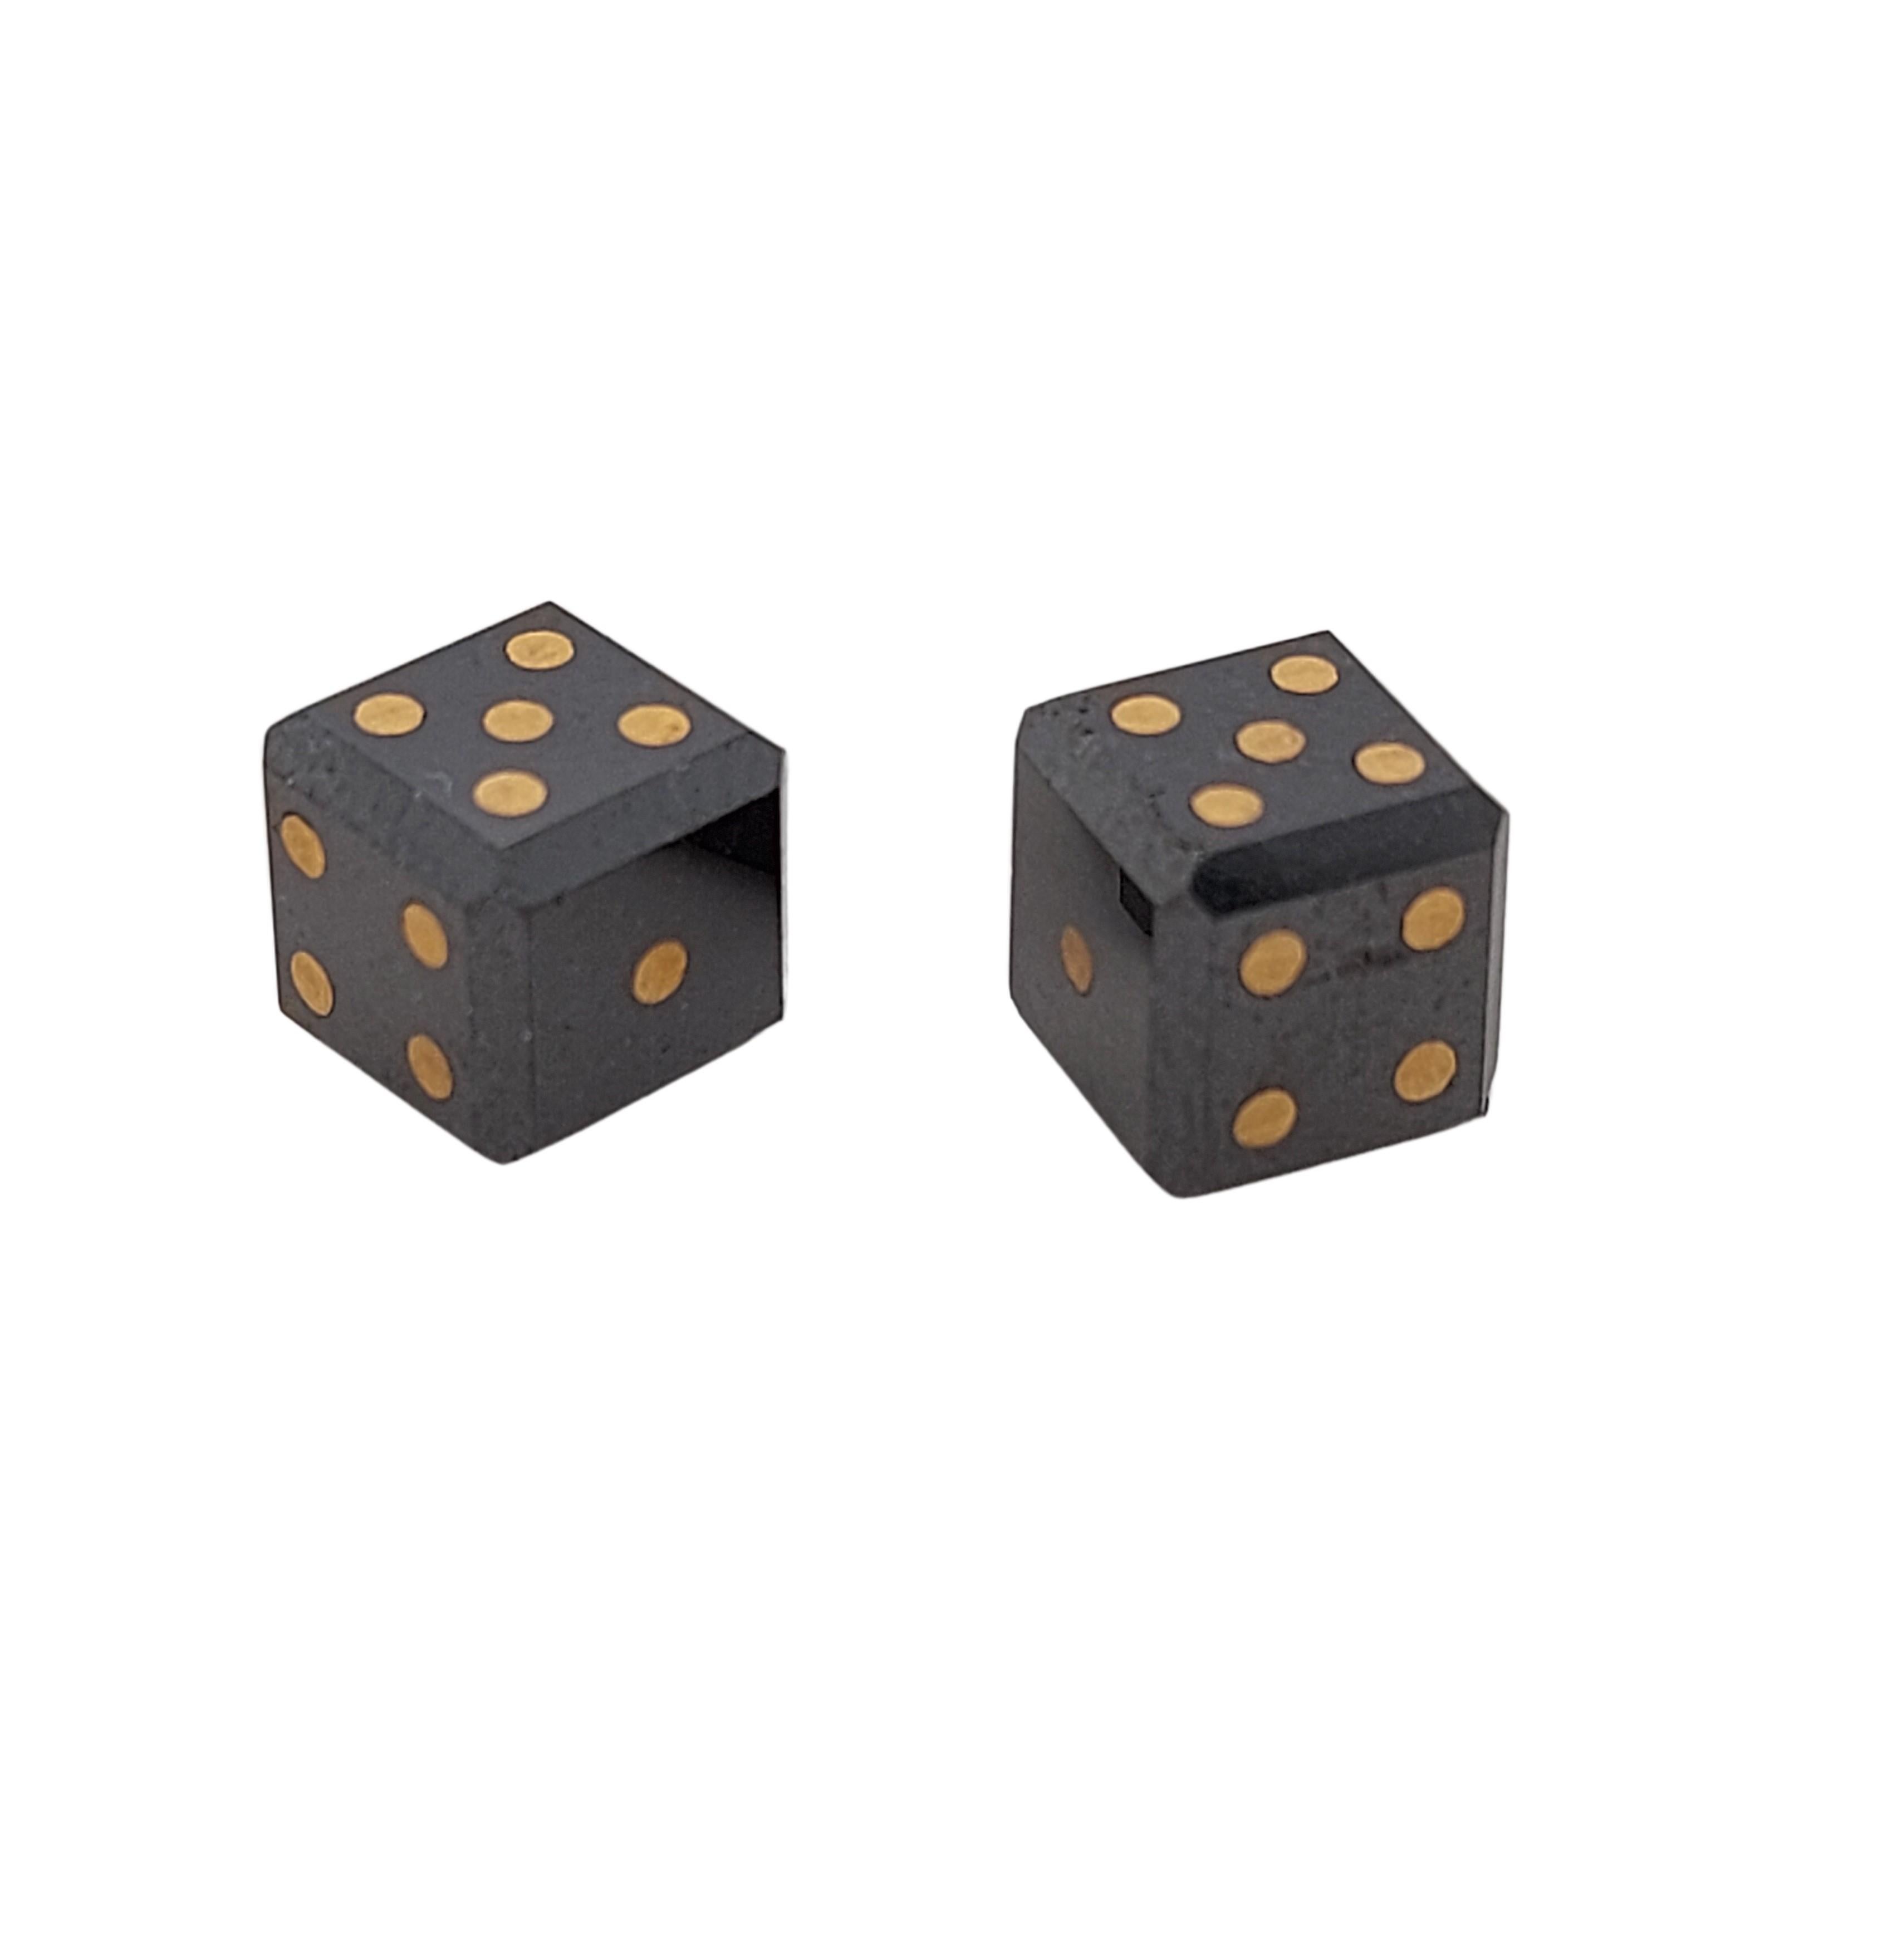 Pair of natural 12,7 Carat black diamond cubes/dice with gold inlay

The dice are inlaid with gold dots to mark their numbers.
The purity of the gold is not tested.

Measurements: 7 mm x 7 mm

Total weight: 2.6 gram / 0.090 oz / 1.7 dwt

Option of